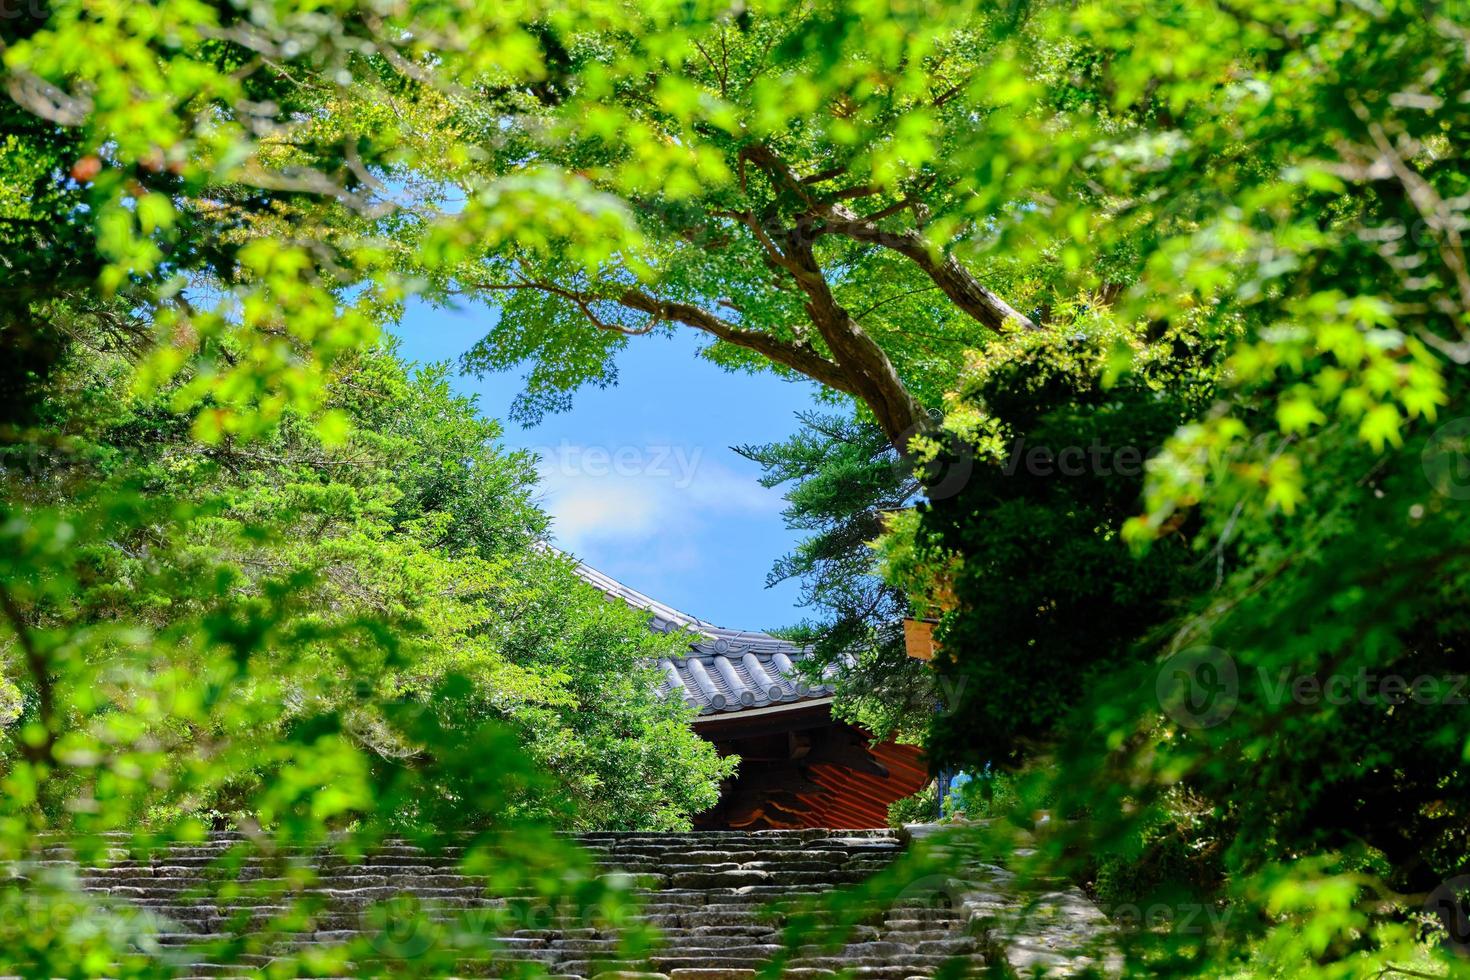 Peeking at a temple roof through a hole in the trees photo